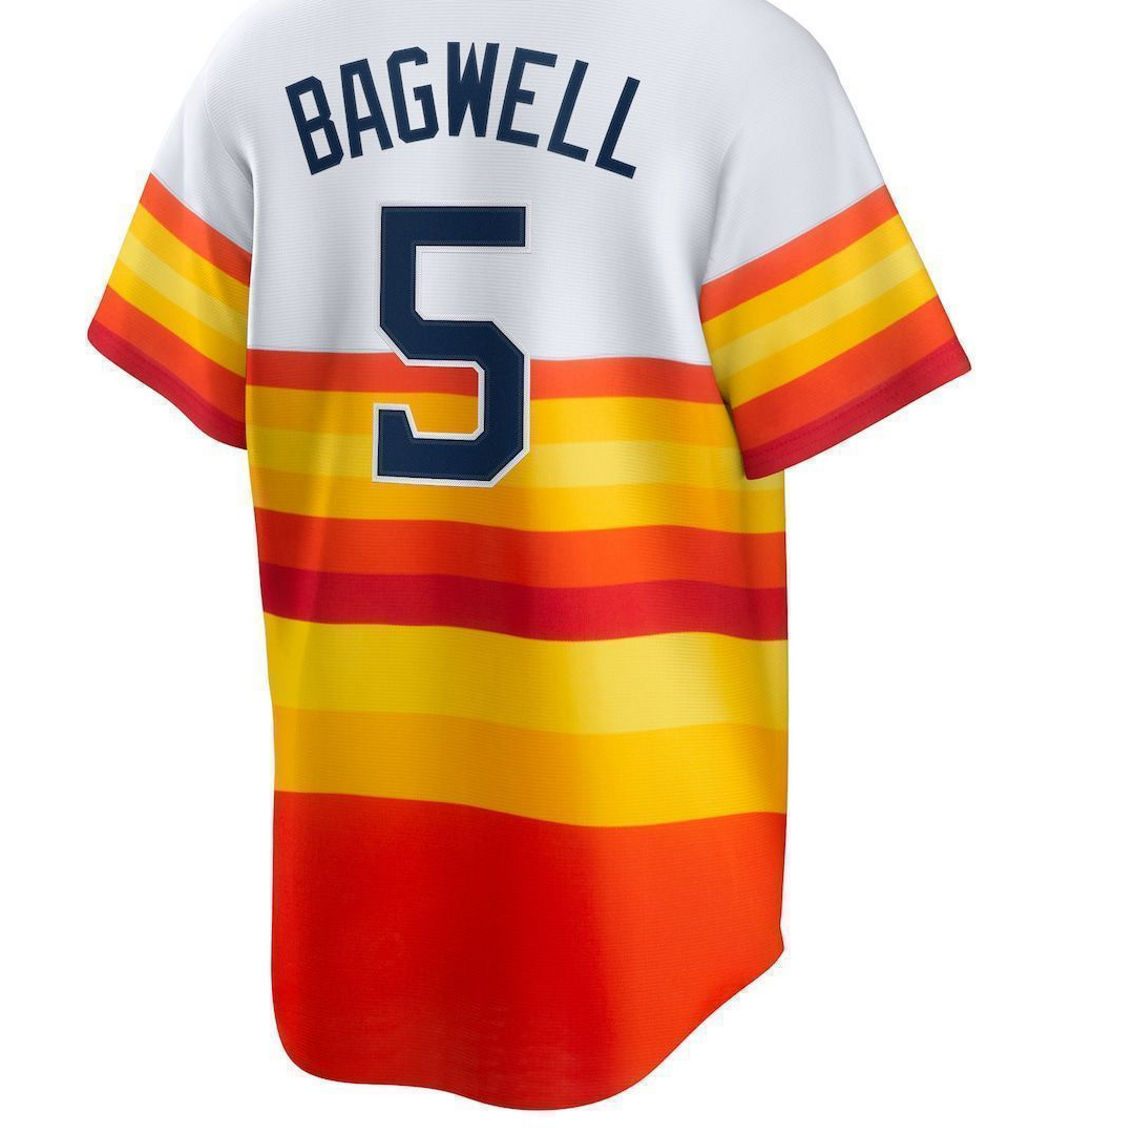 Nike Men's Jeff Bagwell White Houston Astros Home Cooperstown Collection Player Jersey - Image 4 of 4